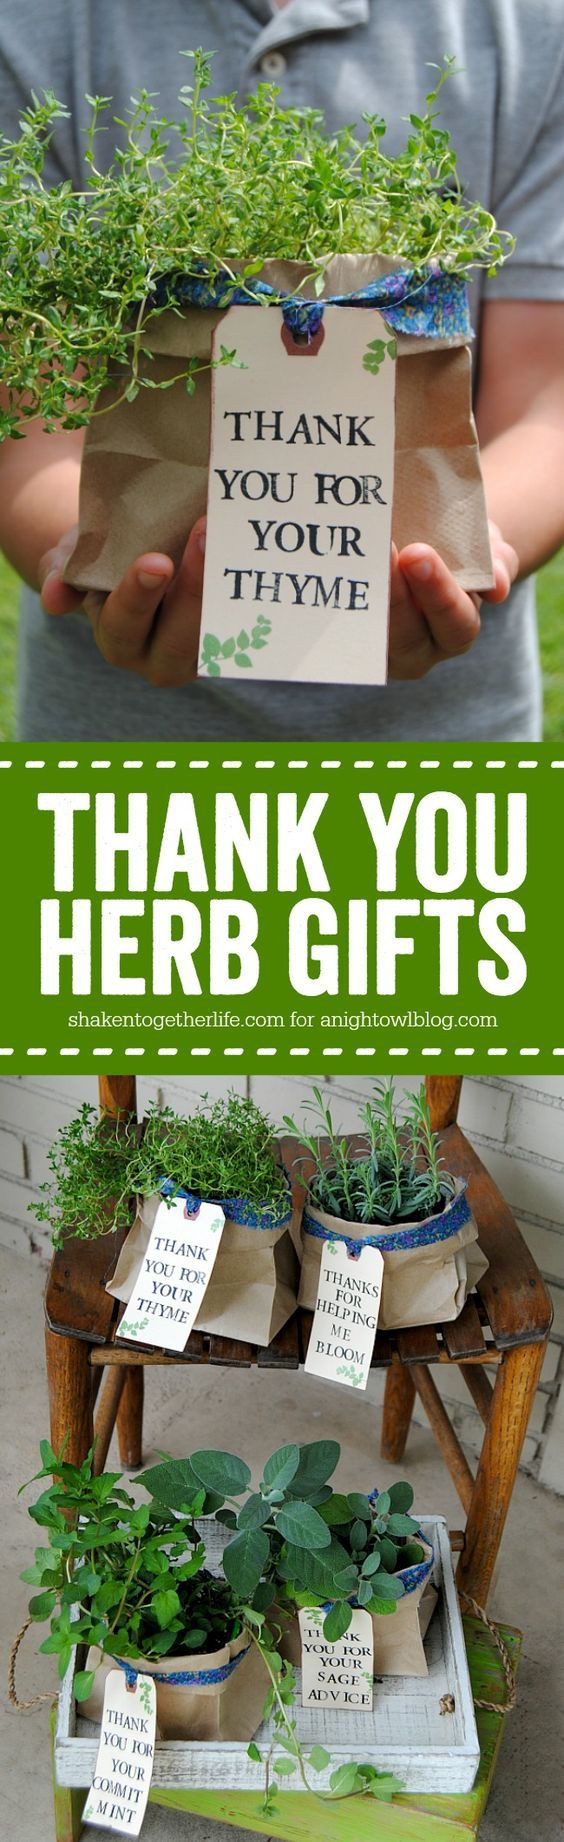 Thank You Gift Ideas For Coworkers
 The 25 best Thank you ts ideas on Pinterest